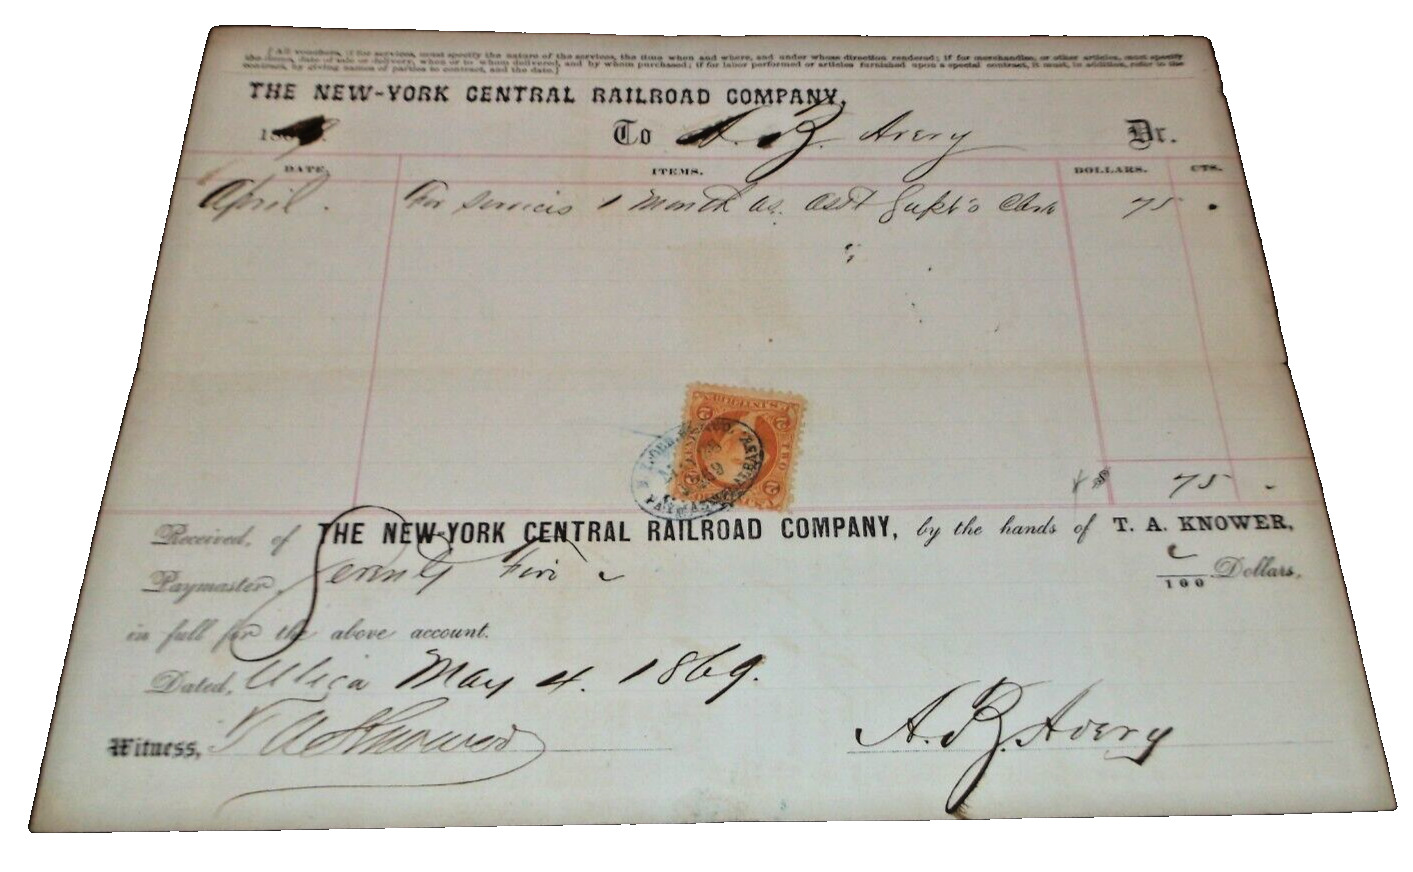 APRIL 1869 NEW YORK CENTRAL RAILROAD NYC PAYMASTER VOUCHER A B AVERY UTICA